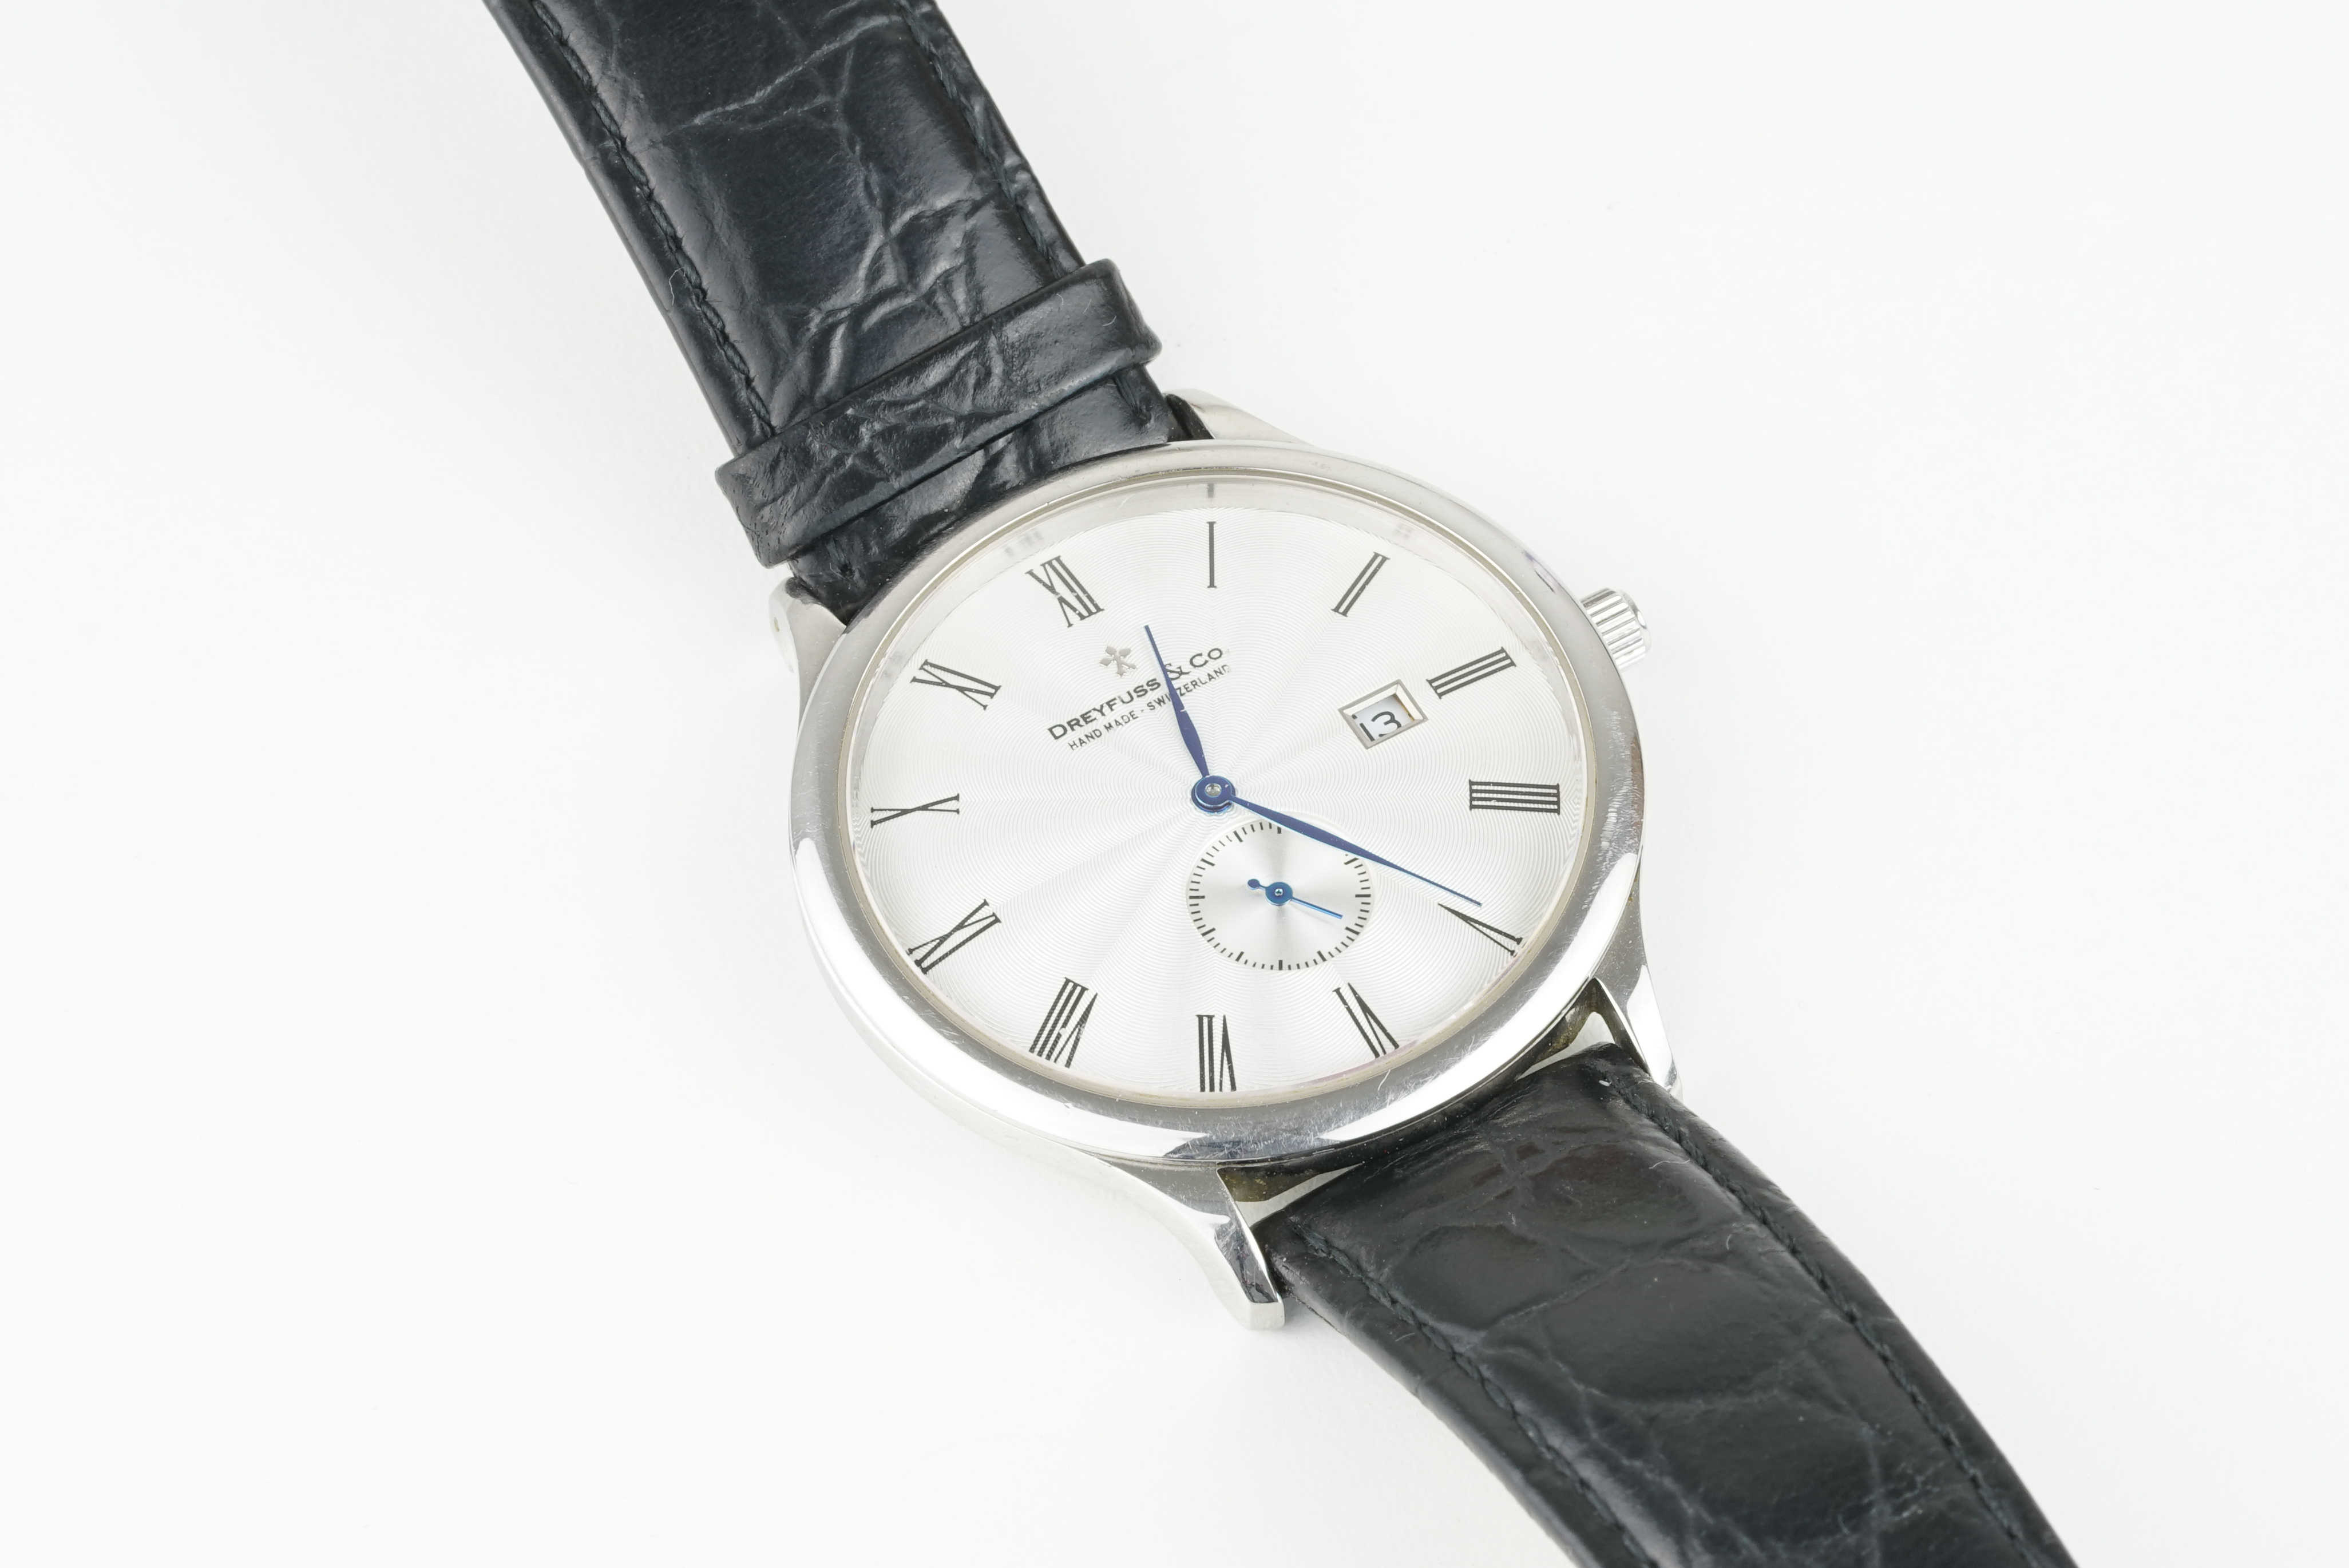 DREYFUSS & CO DATE QUARTZ WRISTWATCH, circular guilloche dial with hour markers and hands, 40mm